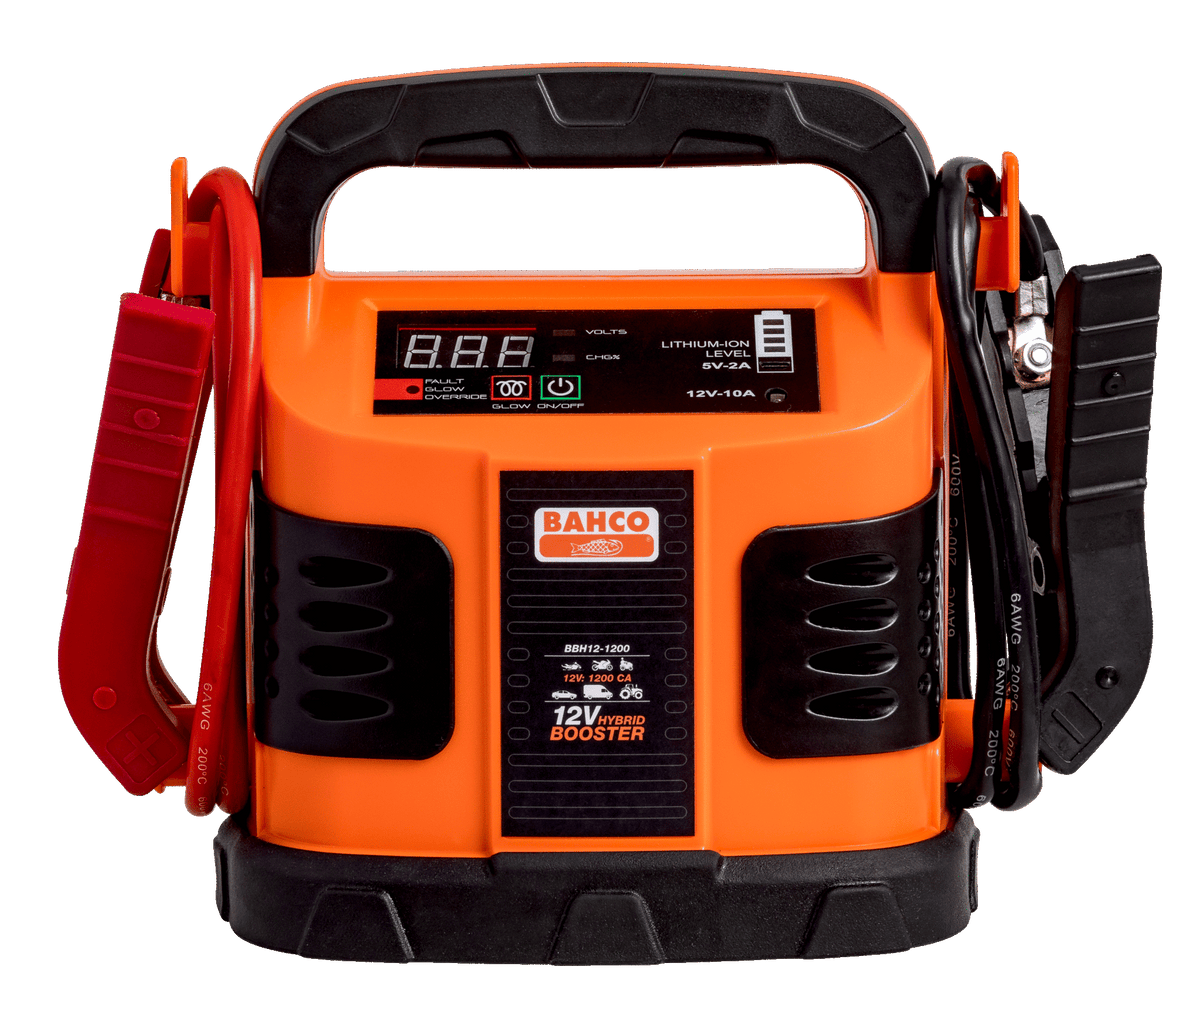 BAHCO BBH12-1200 Lithium Battery Booster 12V 1200CA